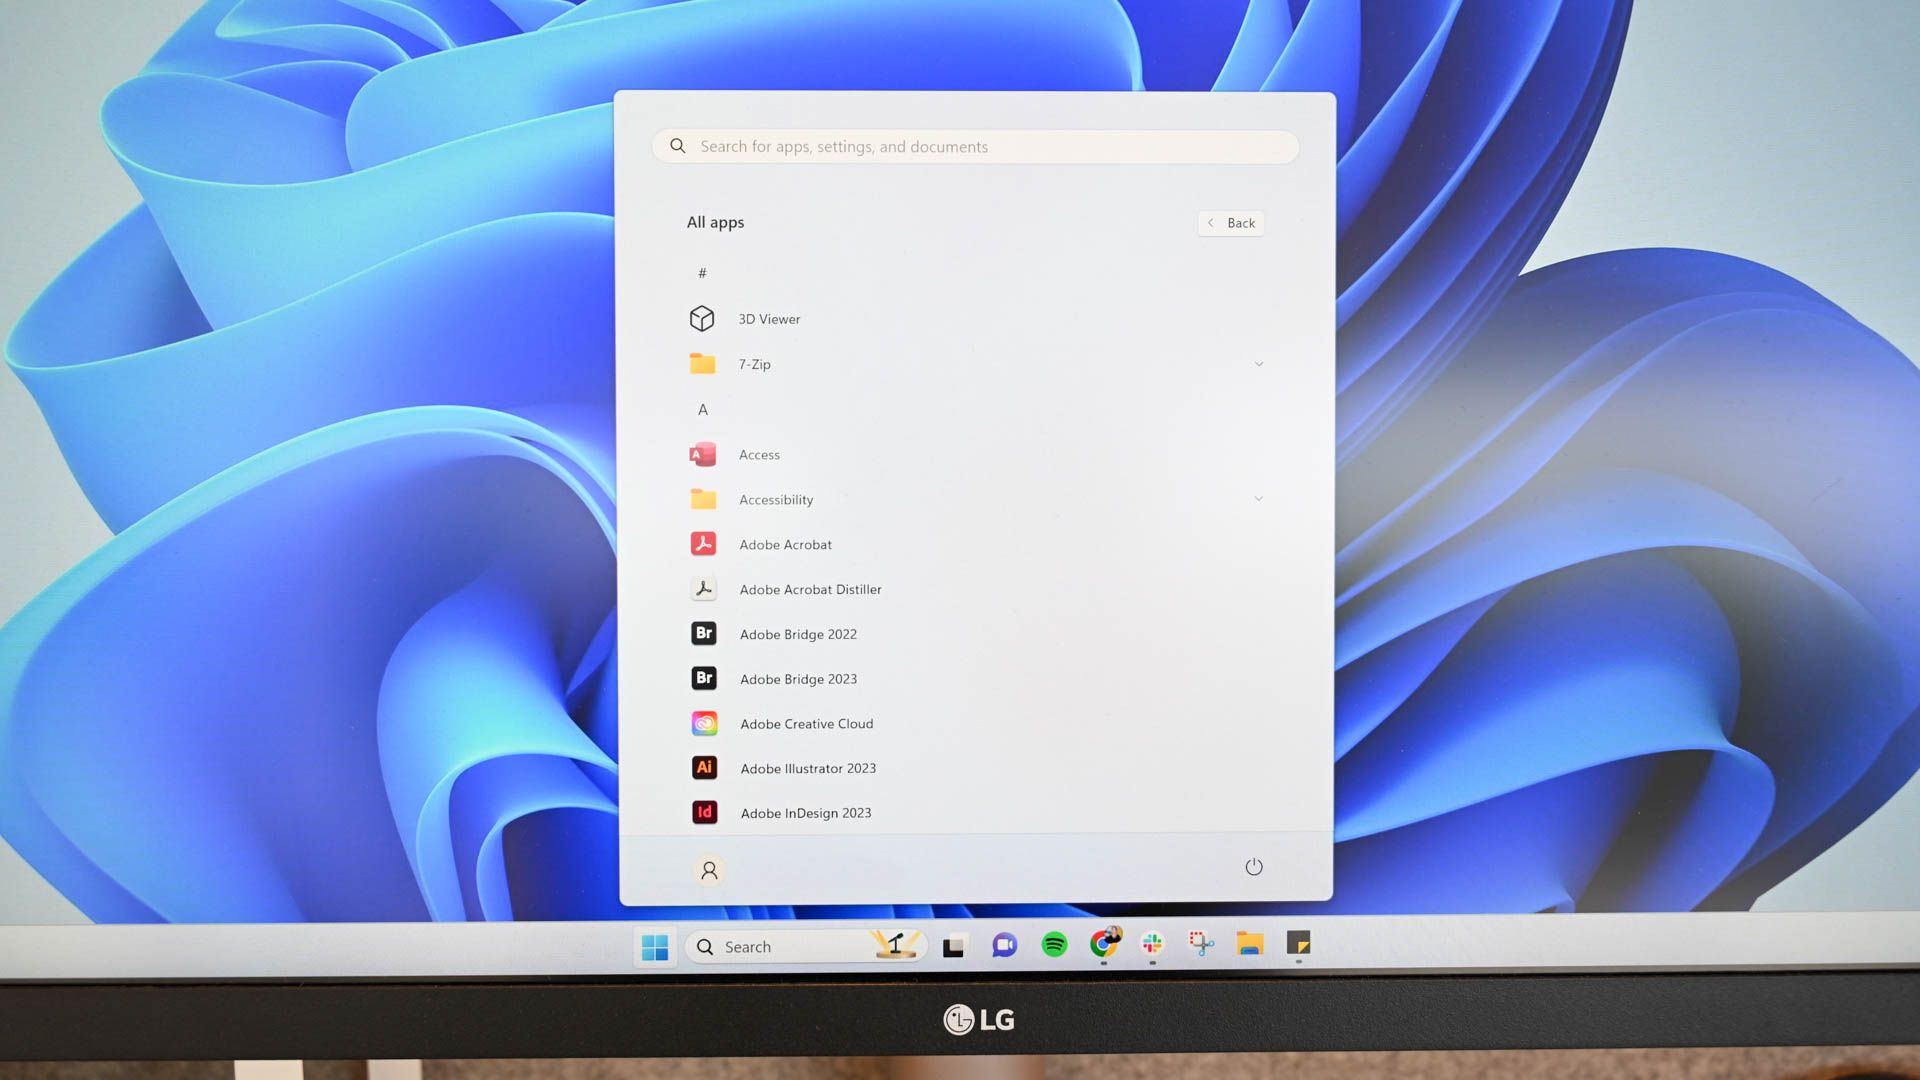 Some app icons visible in the Windows 11 Start Menu. 